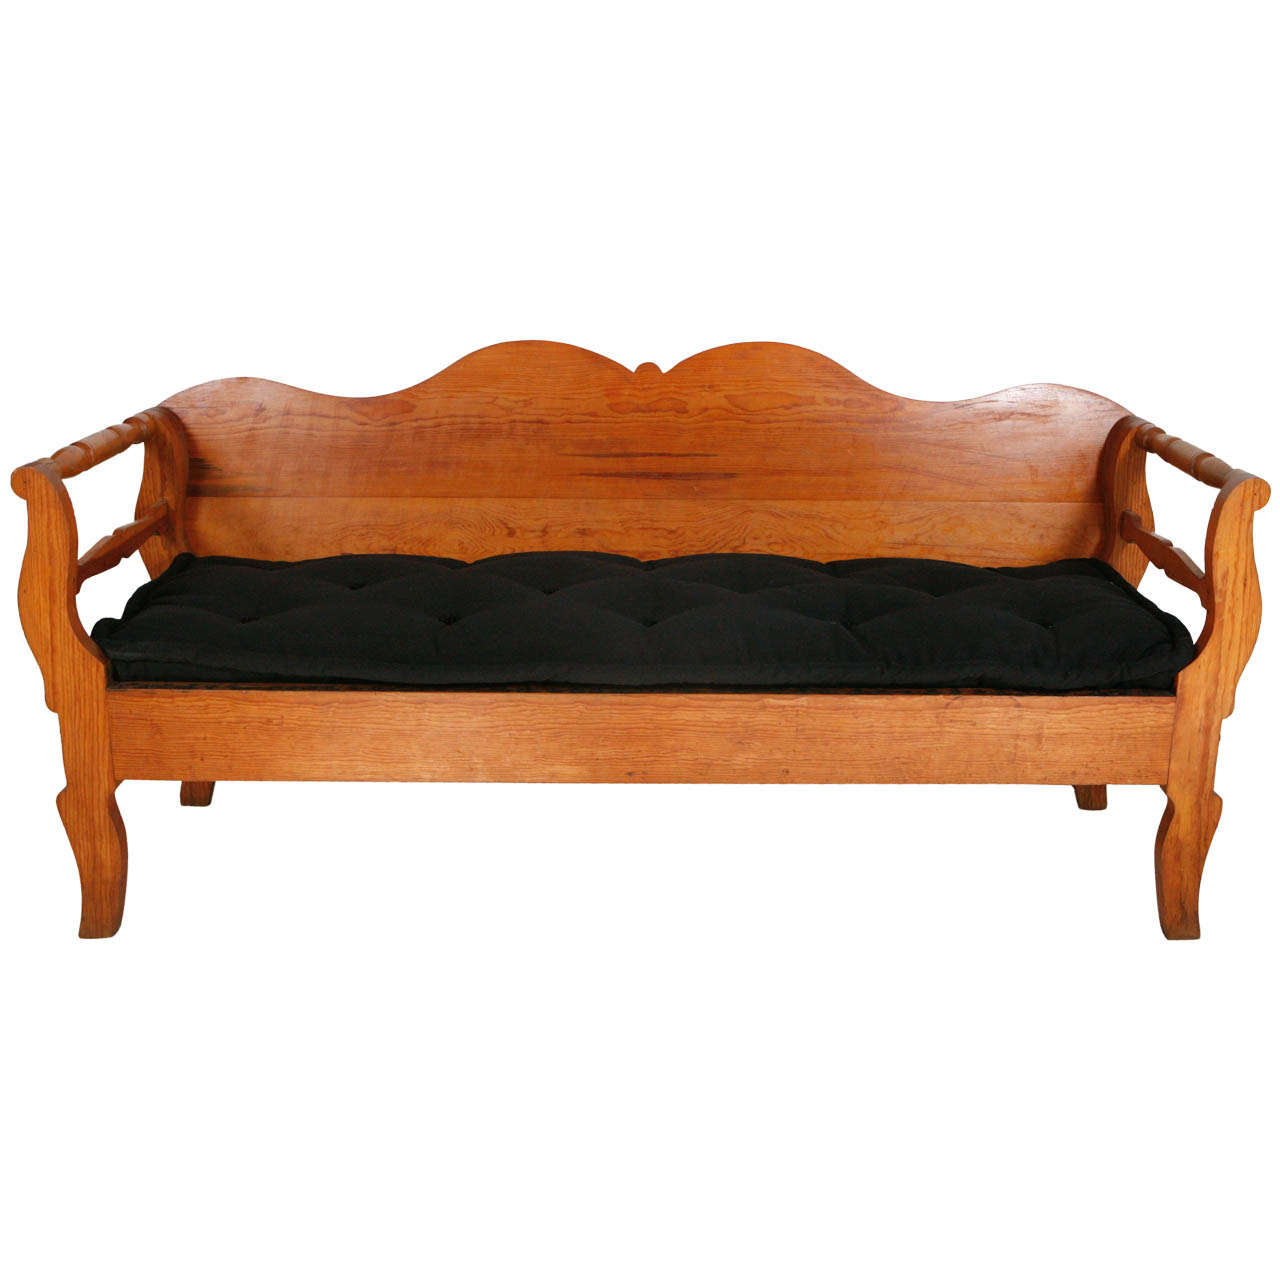 Wood Settee with Black Mattress Tufted Seat